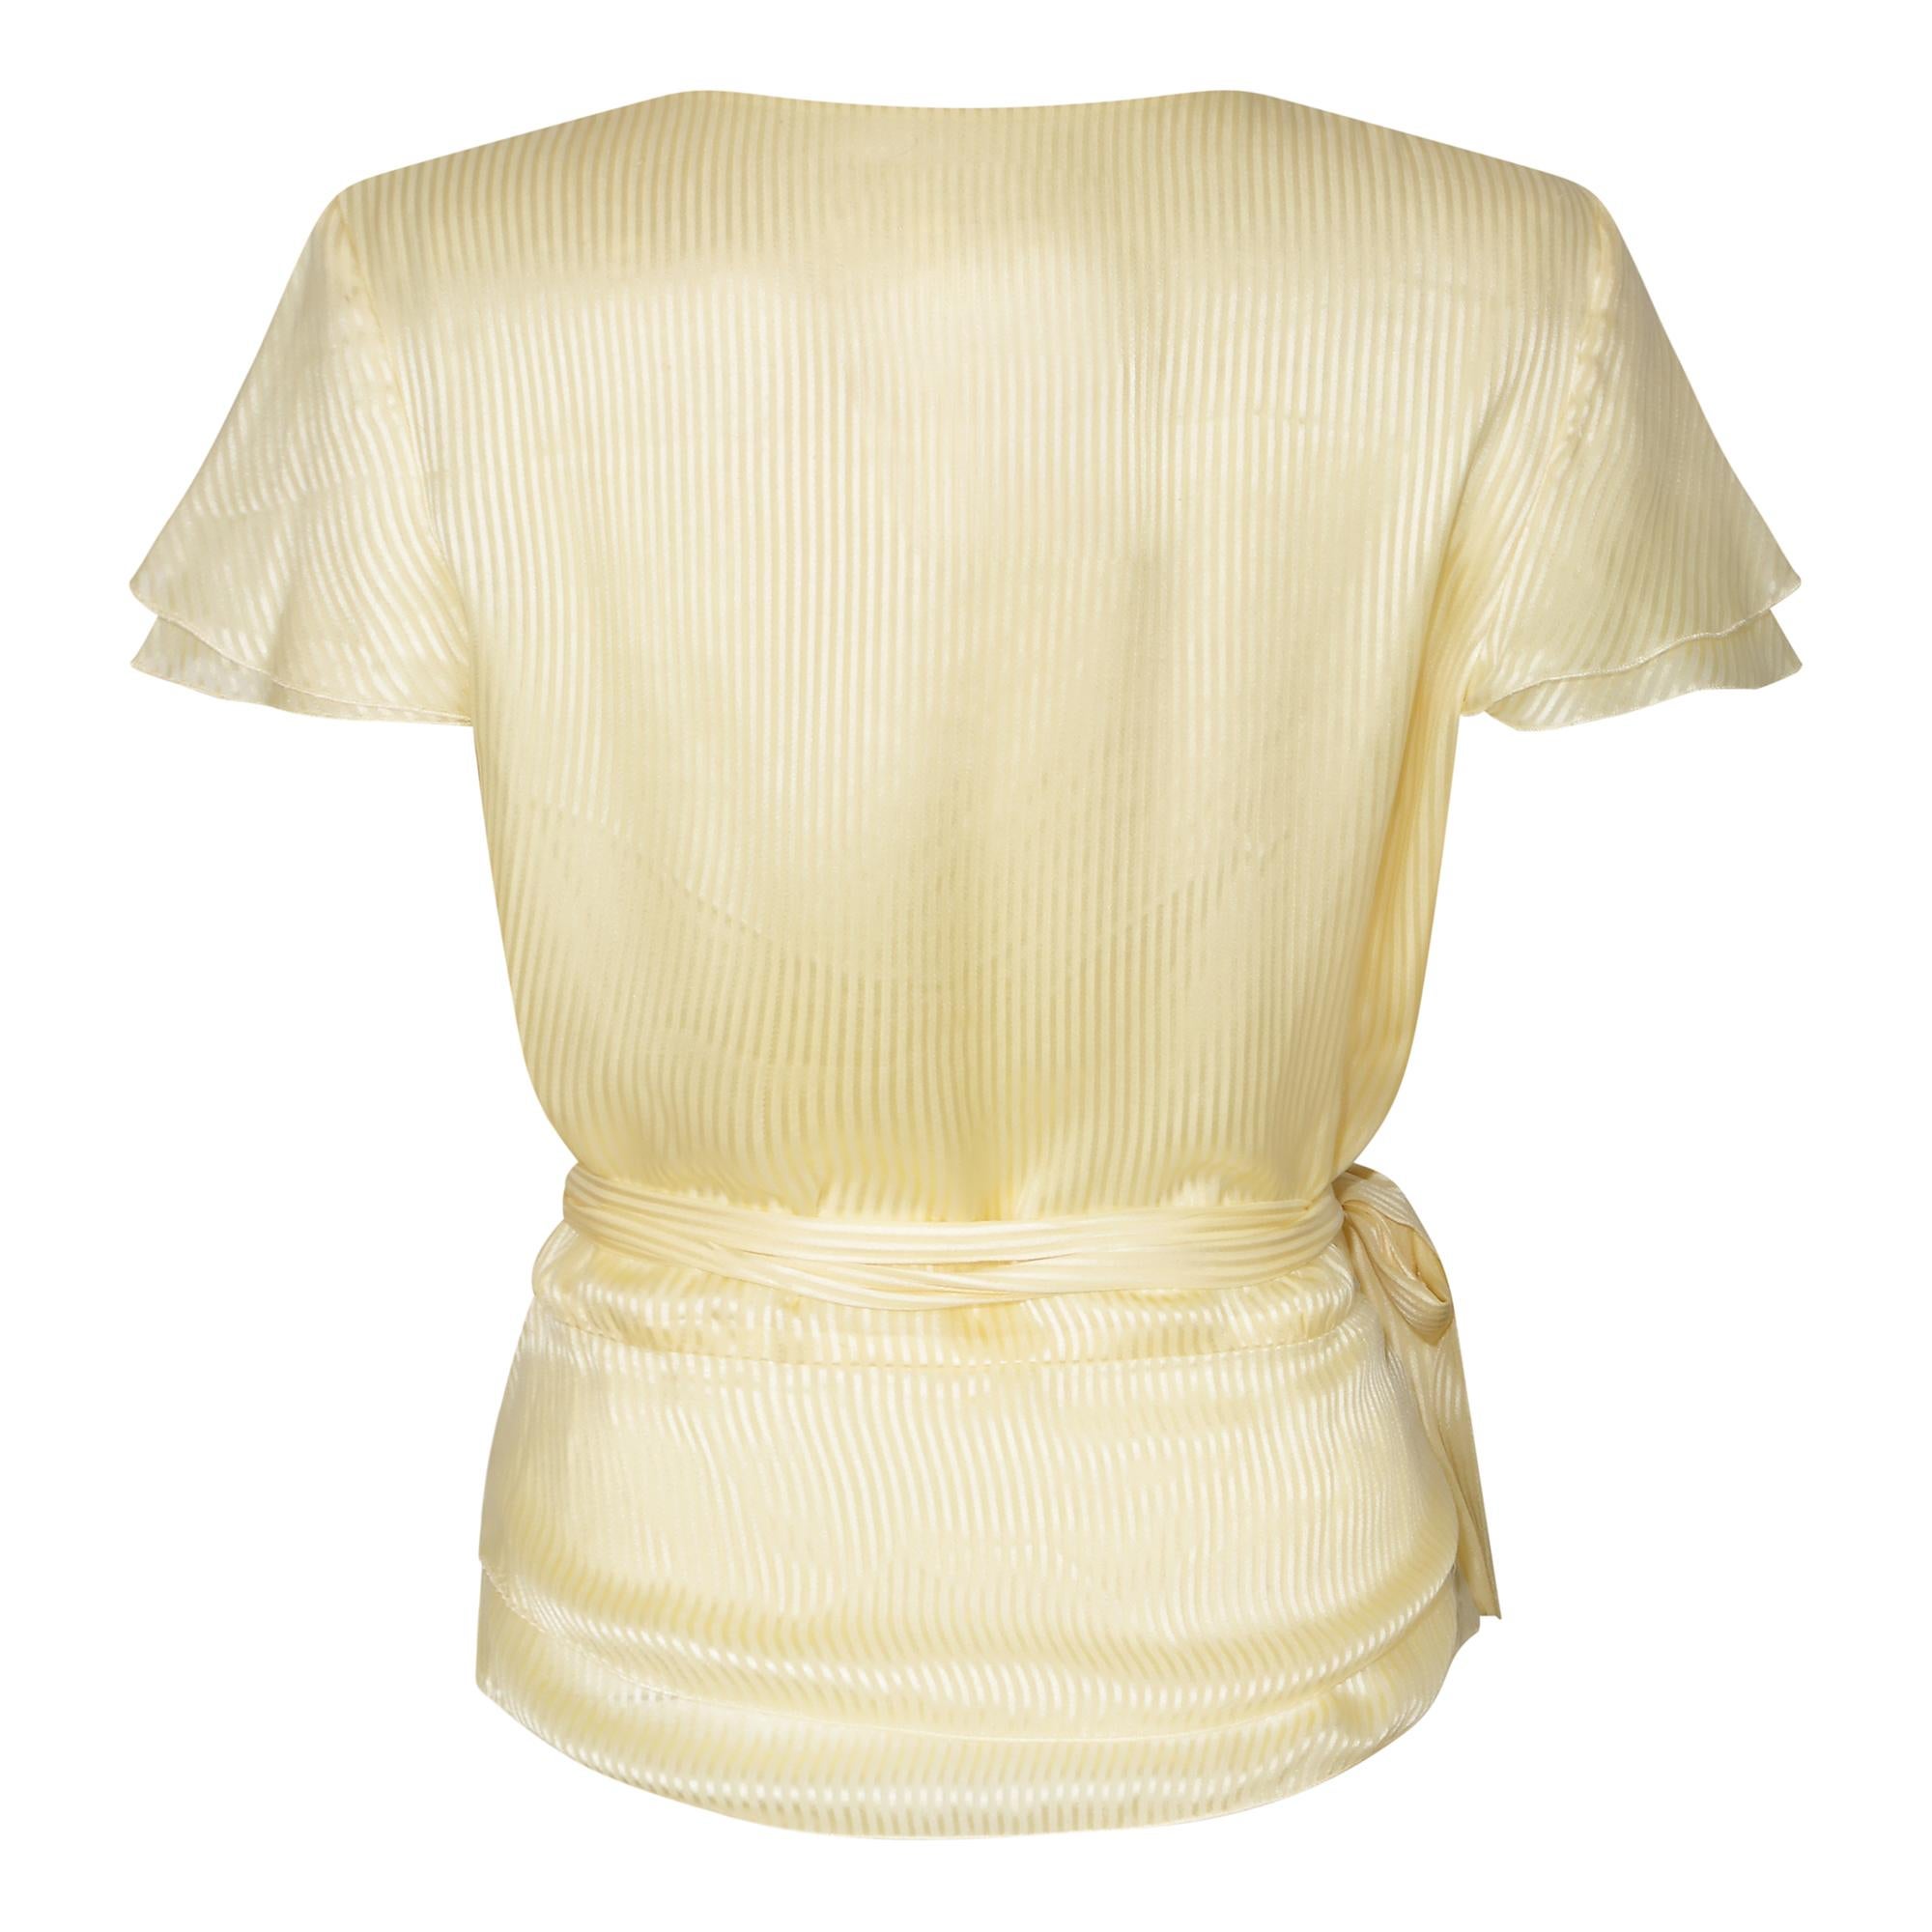 This pale yellow silk wrap around blouse is classic and timeless; so much so that it is difficult to date.  We like to think this was designed by Karl Lagerfeld who had a long association with the now iconic fashion house from the late 1960s through